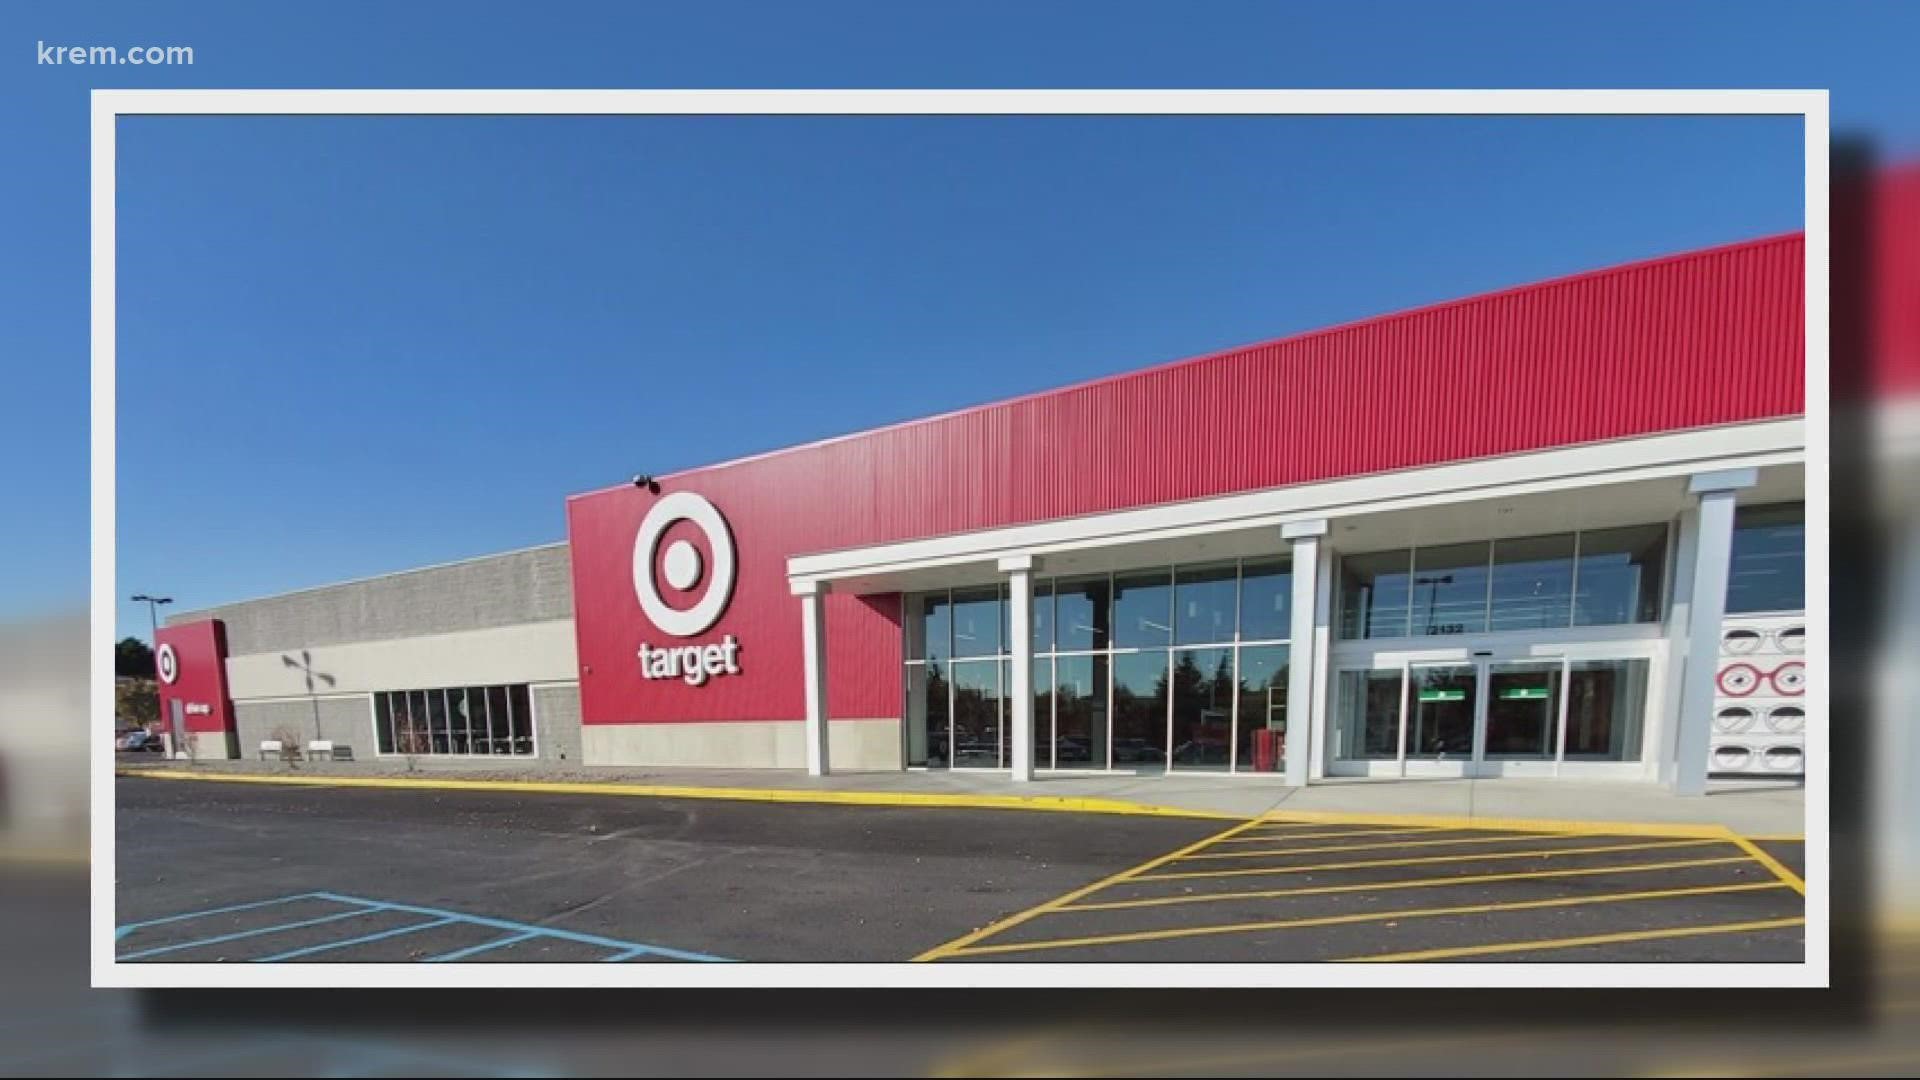 After a long time waiting, the first Target in the Moscow area opened its doors on 2132 W. Pullman Rd. on Wednesday.